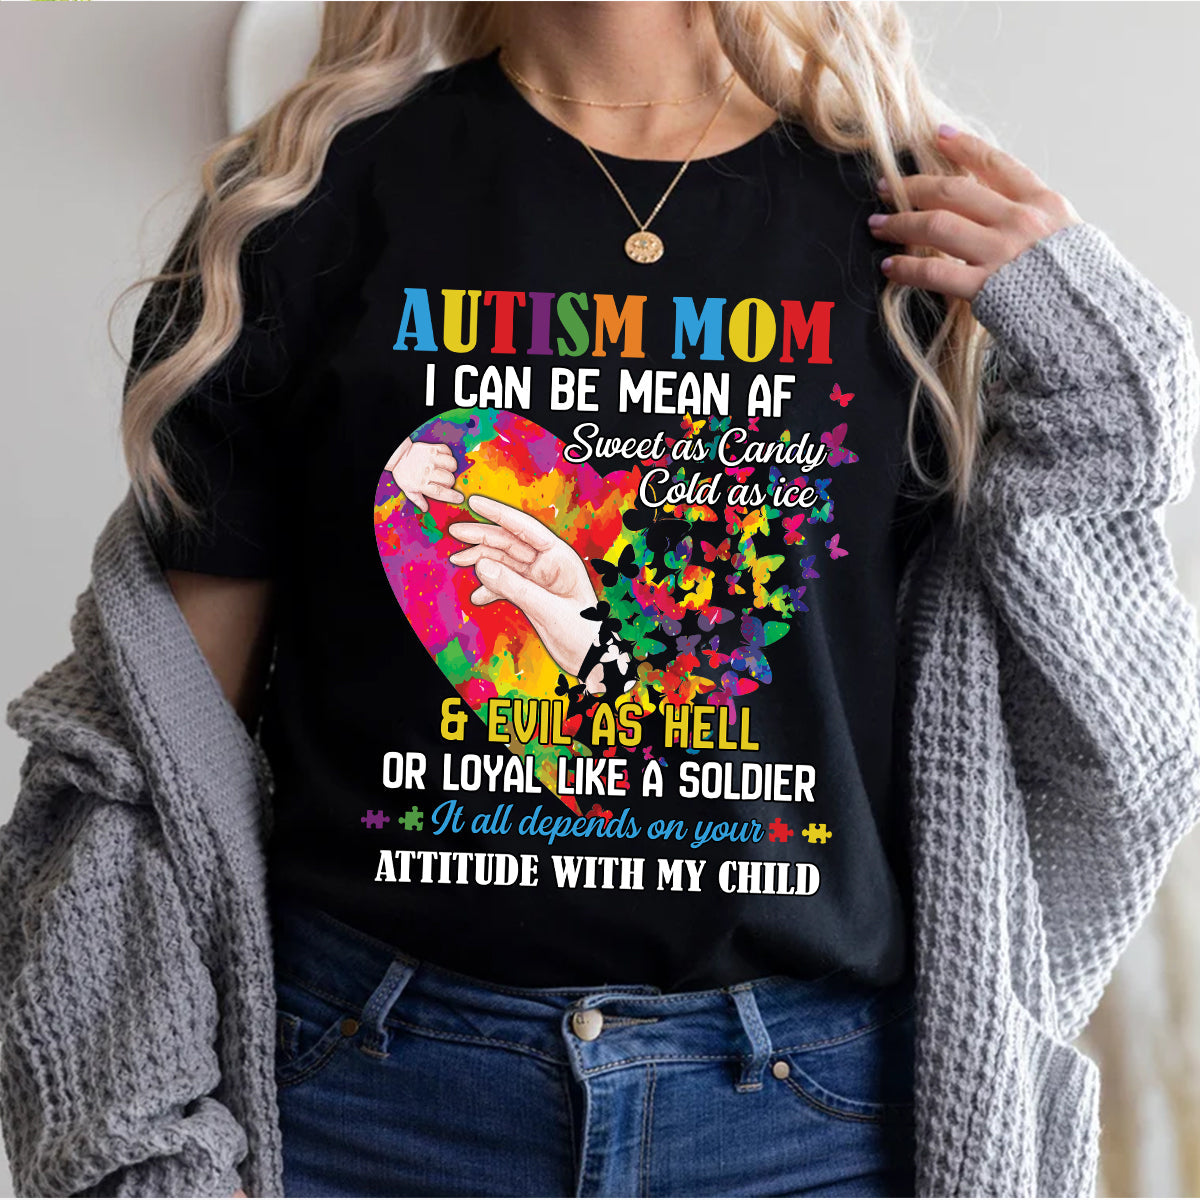 Teesdily | Autism Awareness Shirt, Autism Awareness Autism Mom It All Depends On Your Attitude With My Child, Autistic Gifts Unisex Tshirt Hoodie Sweatshirt Size S-5XL / Mug 11-15Oz